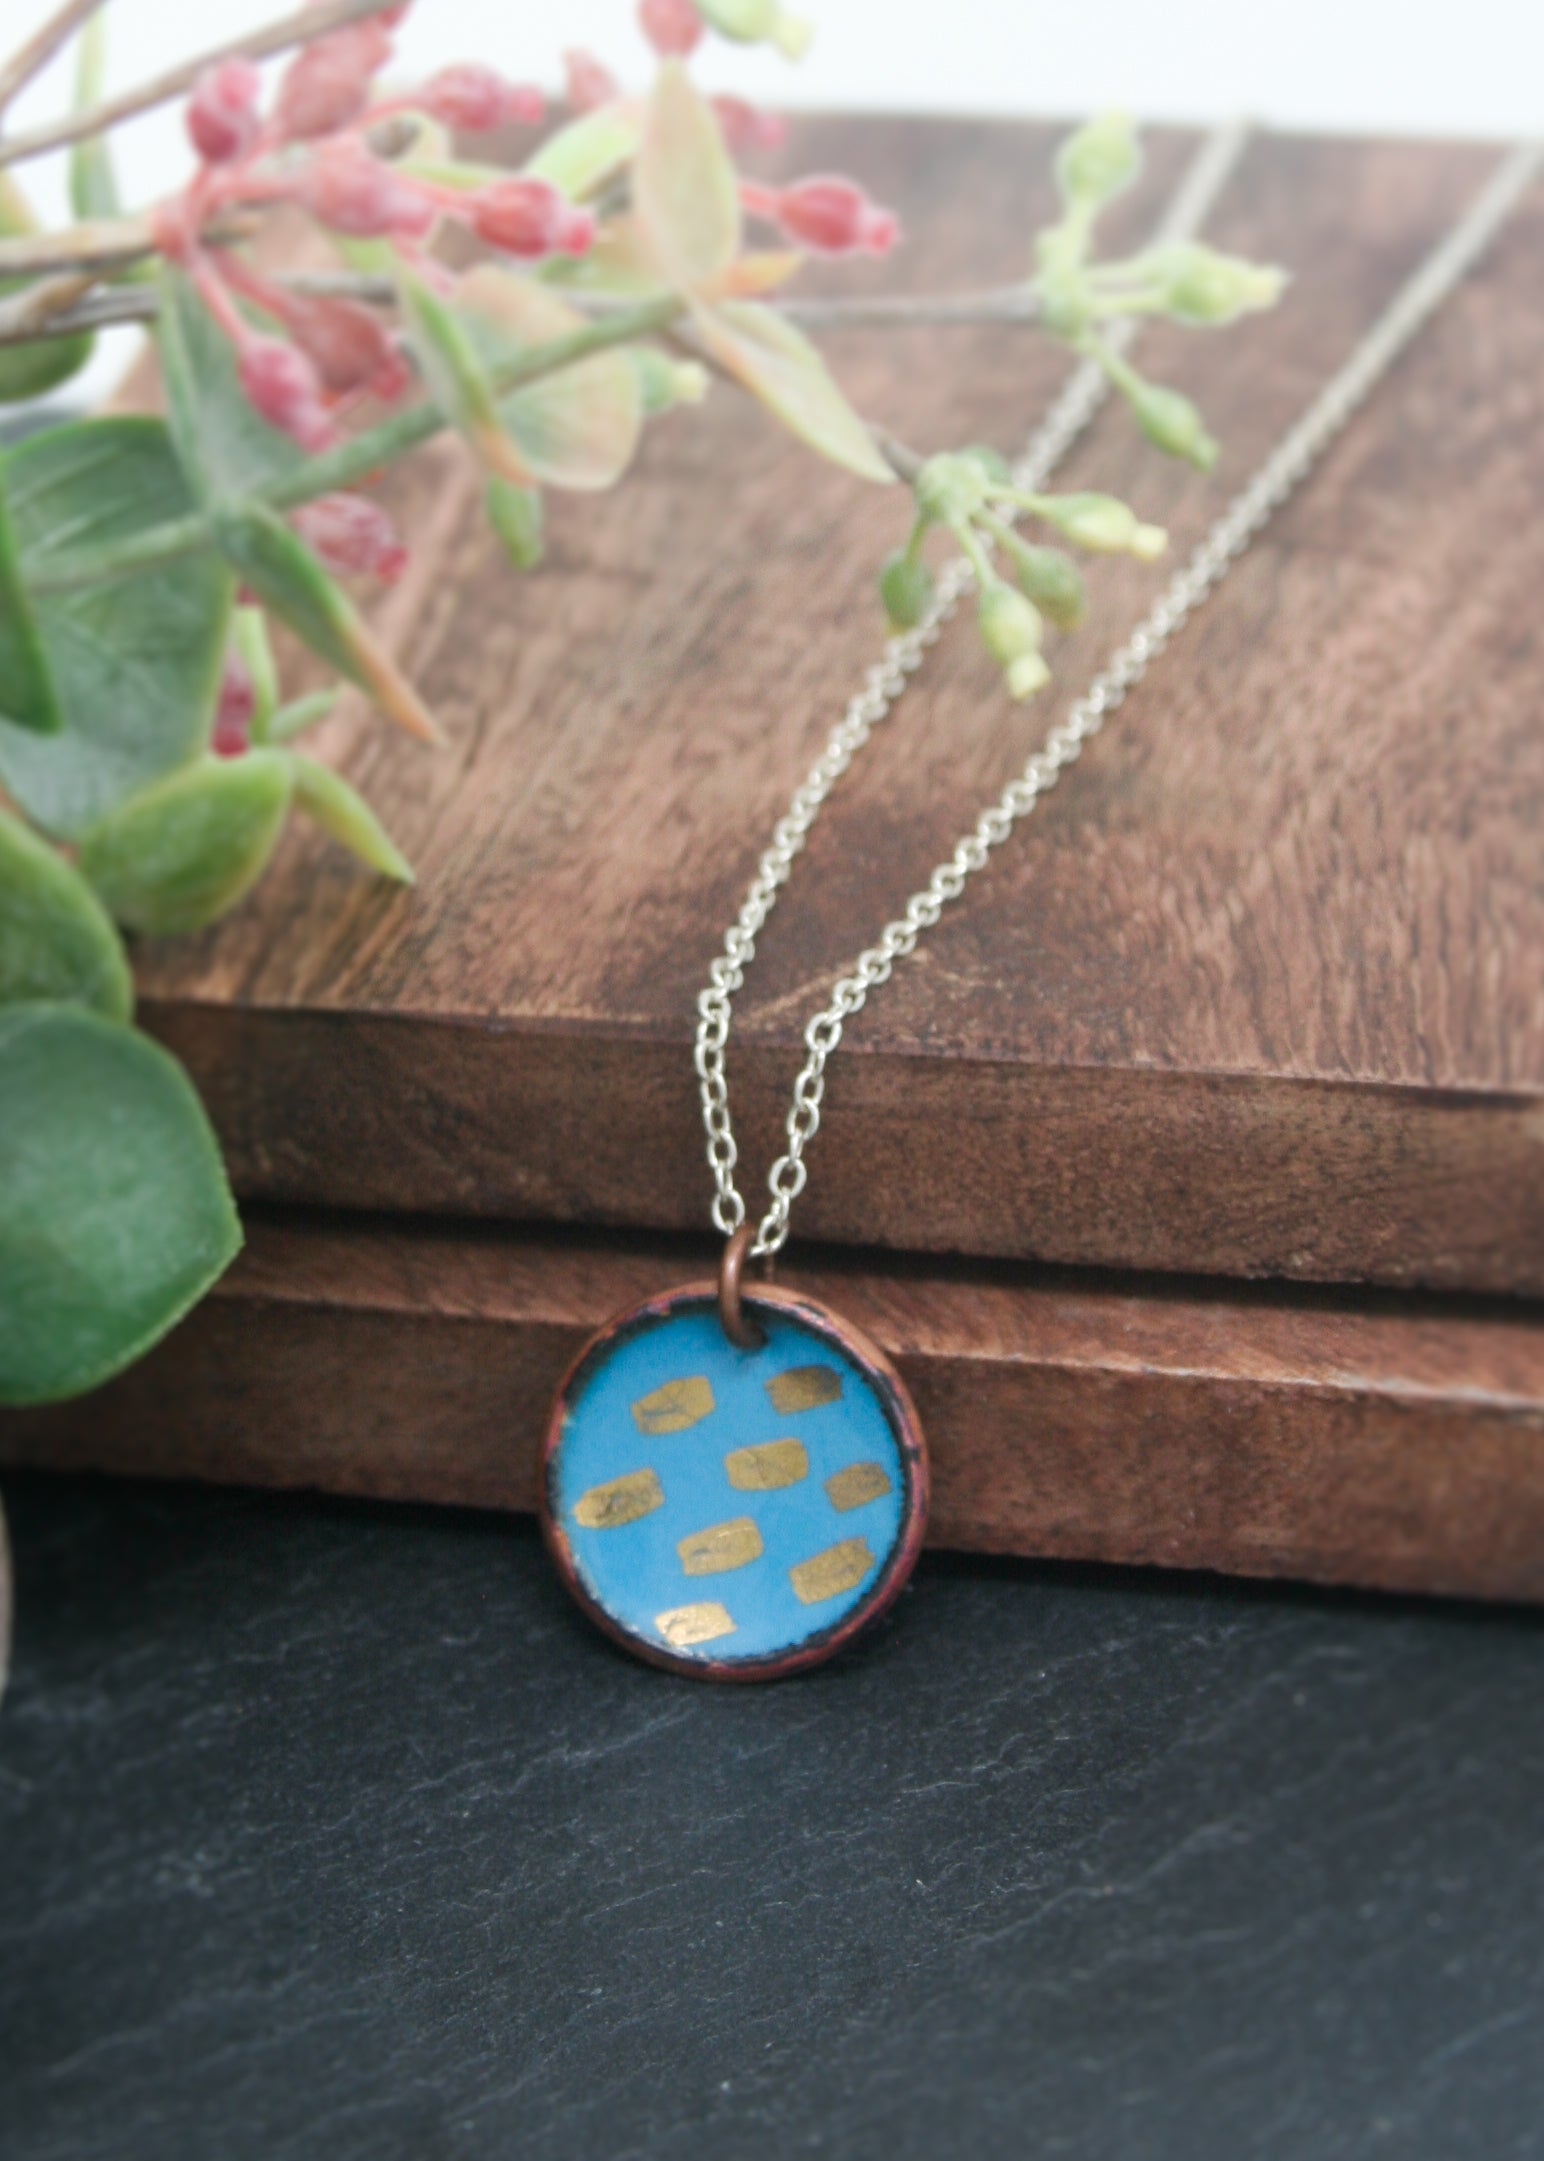 a necklace with a blue and yellow design on it